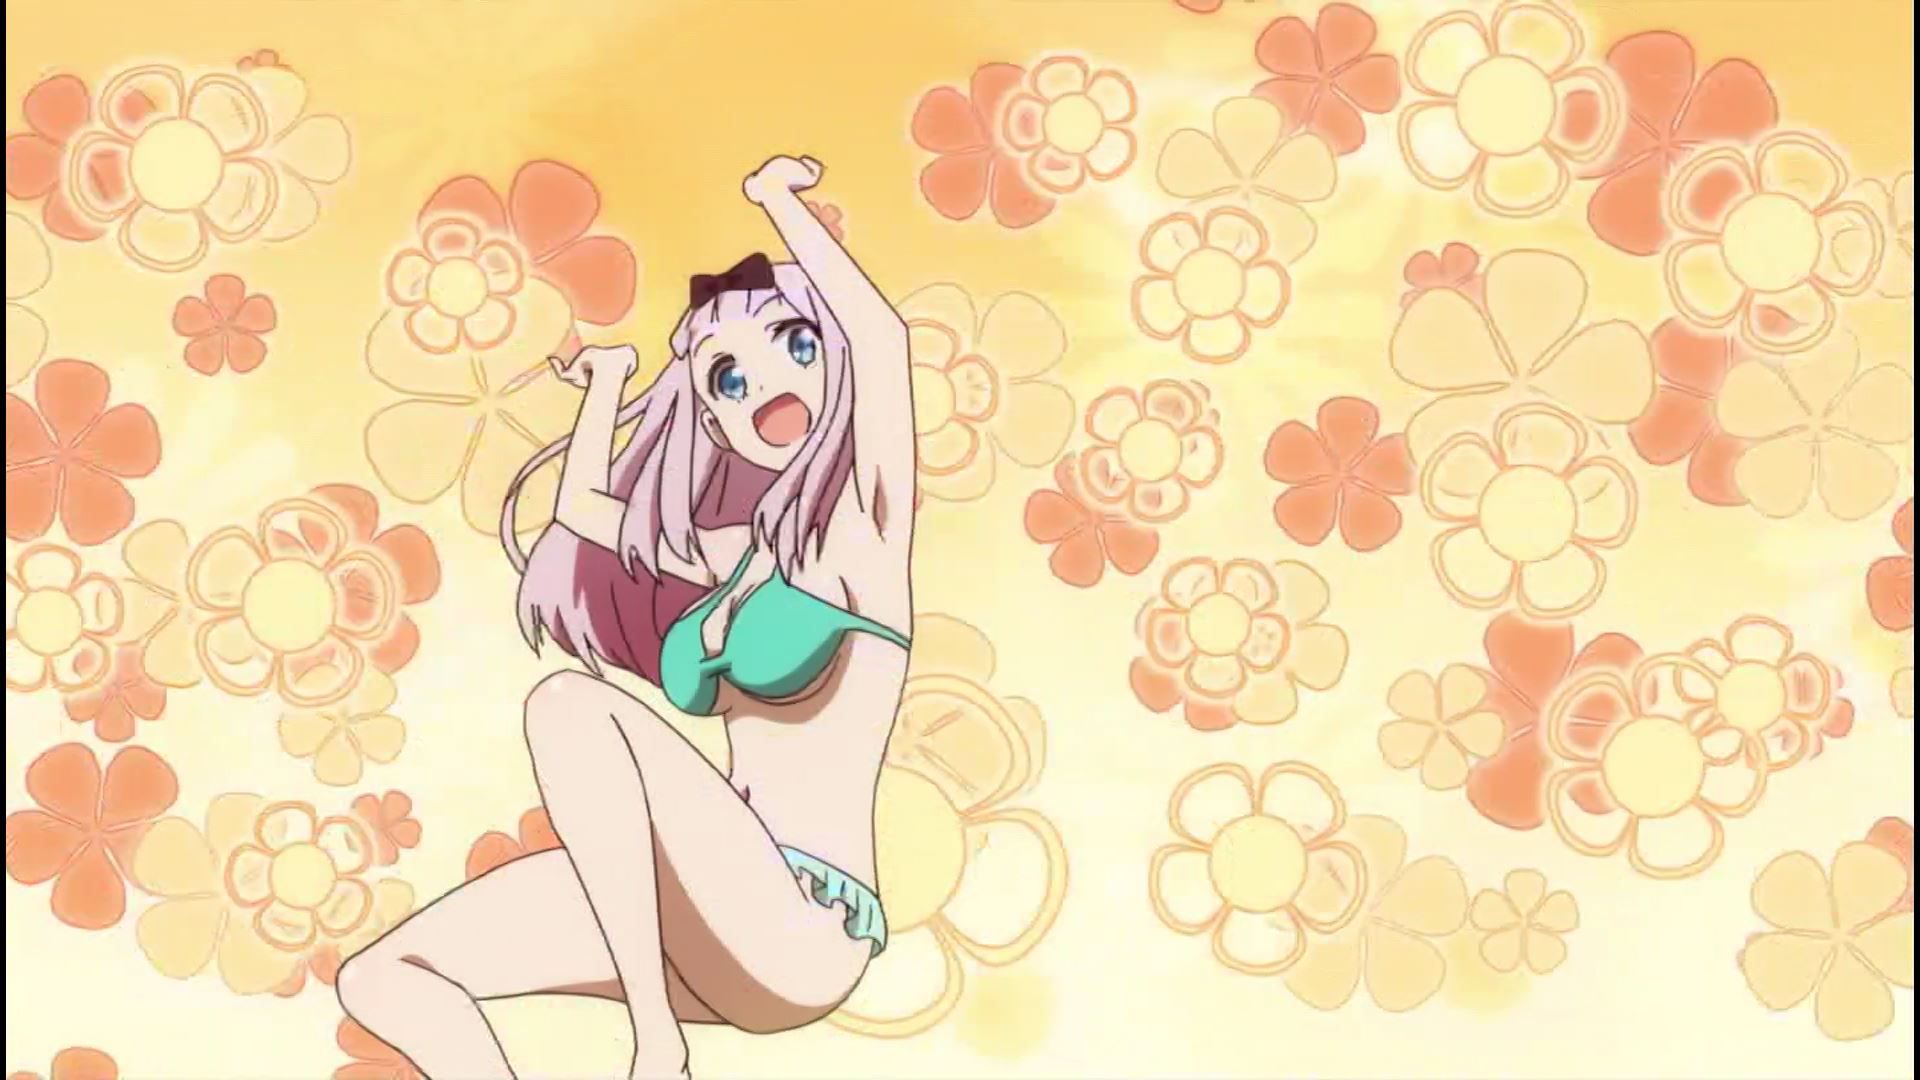 Anime [Kaguya want to be heard] 2 in the story of a girl erotic Pettanko swimsuit and breasts! 18